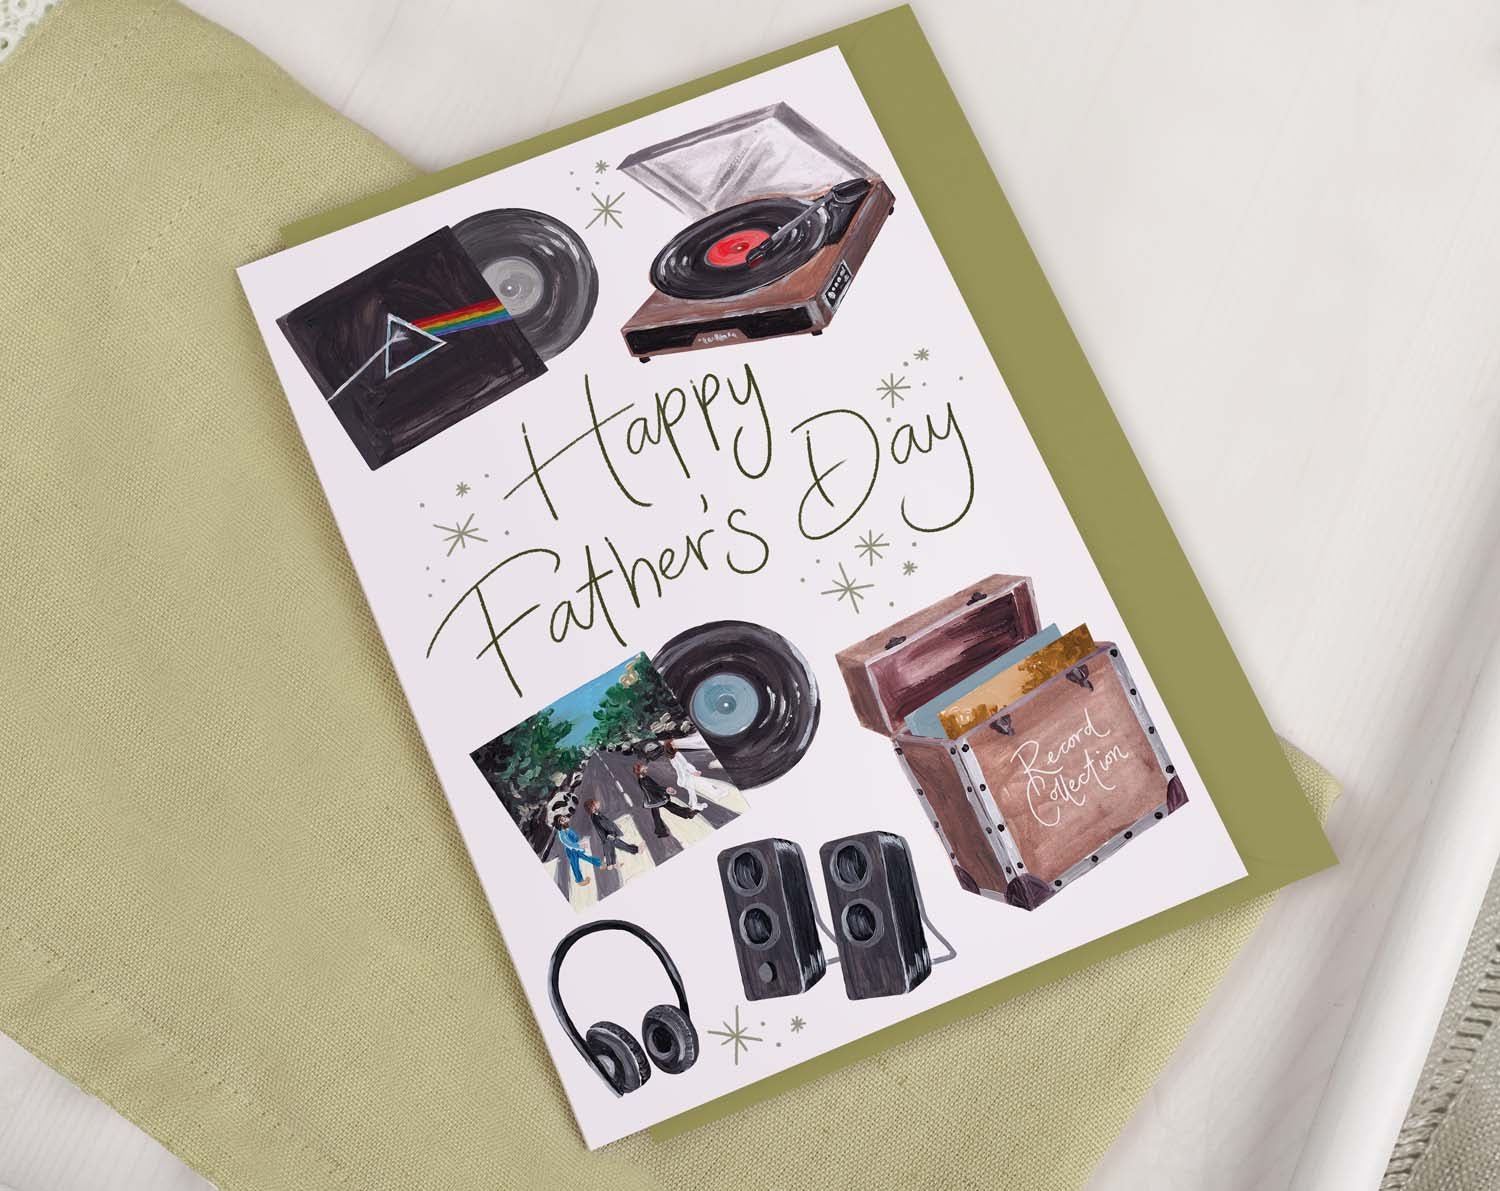 Vinyl Record Father's Day Card